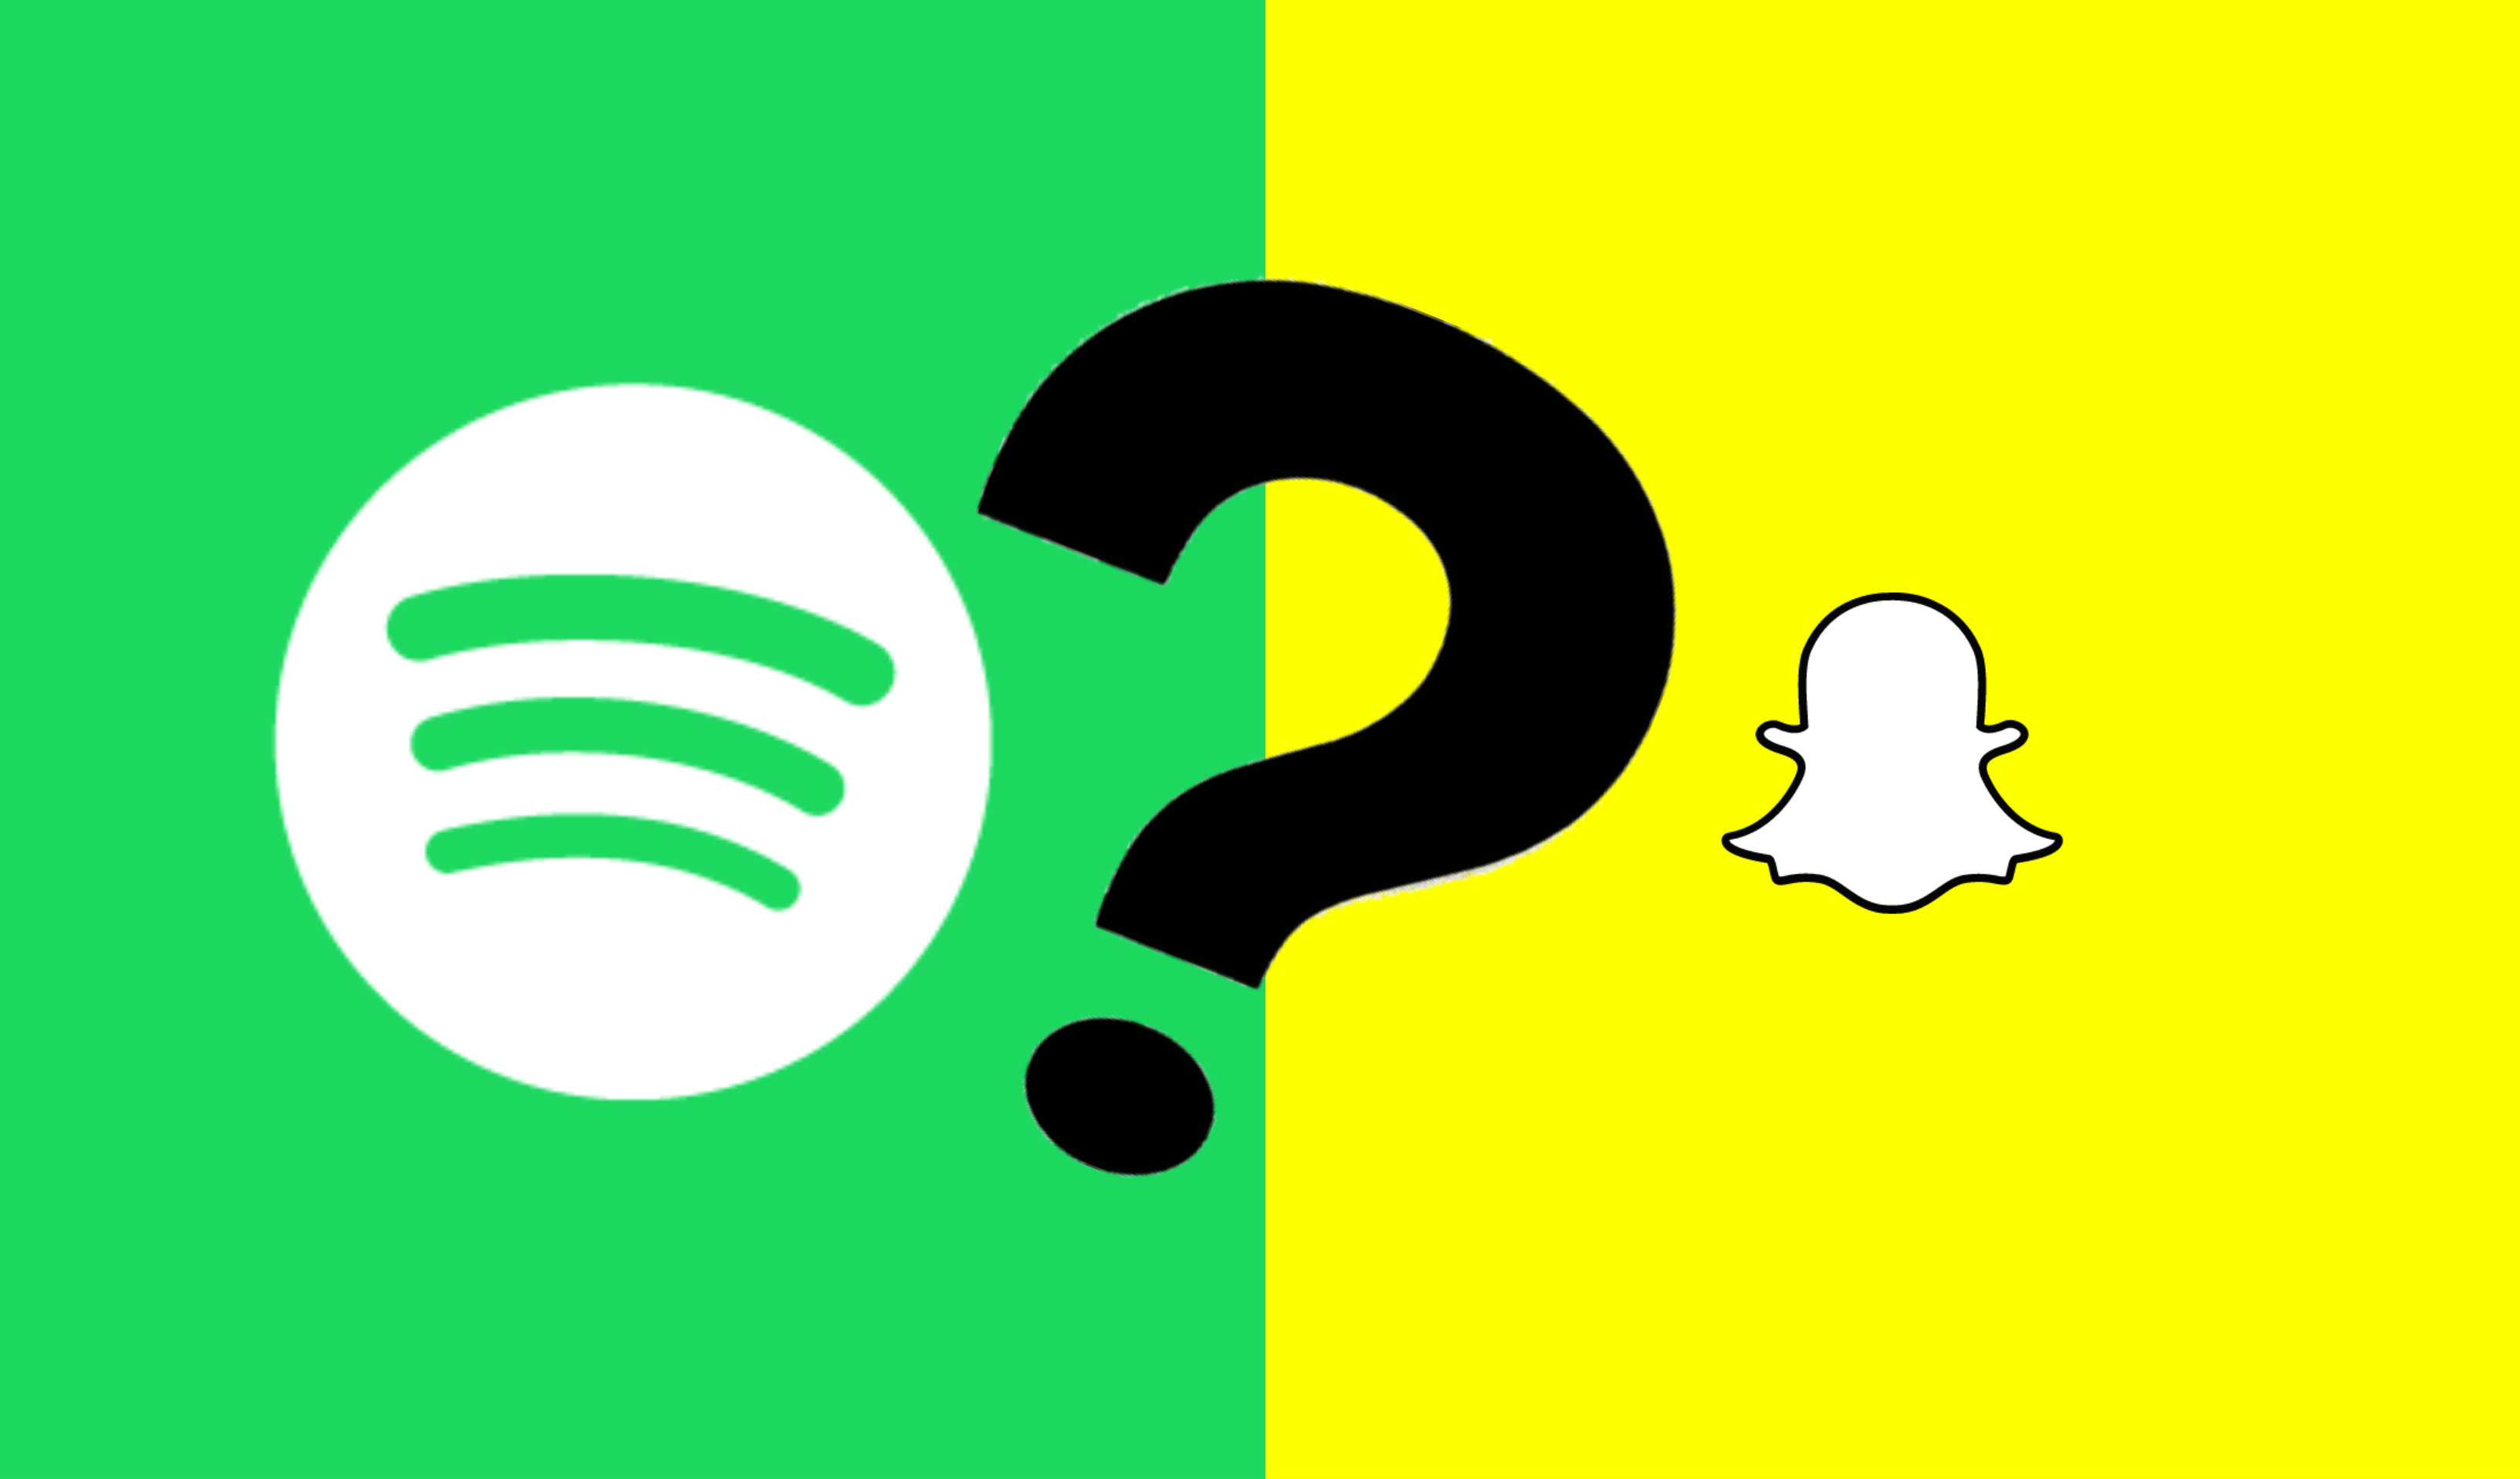 Time for alarm bells? Woes for Spotify & Snapchat